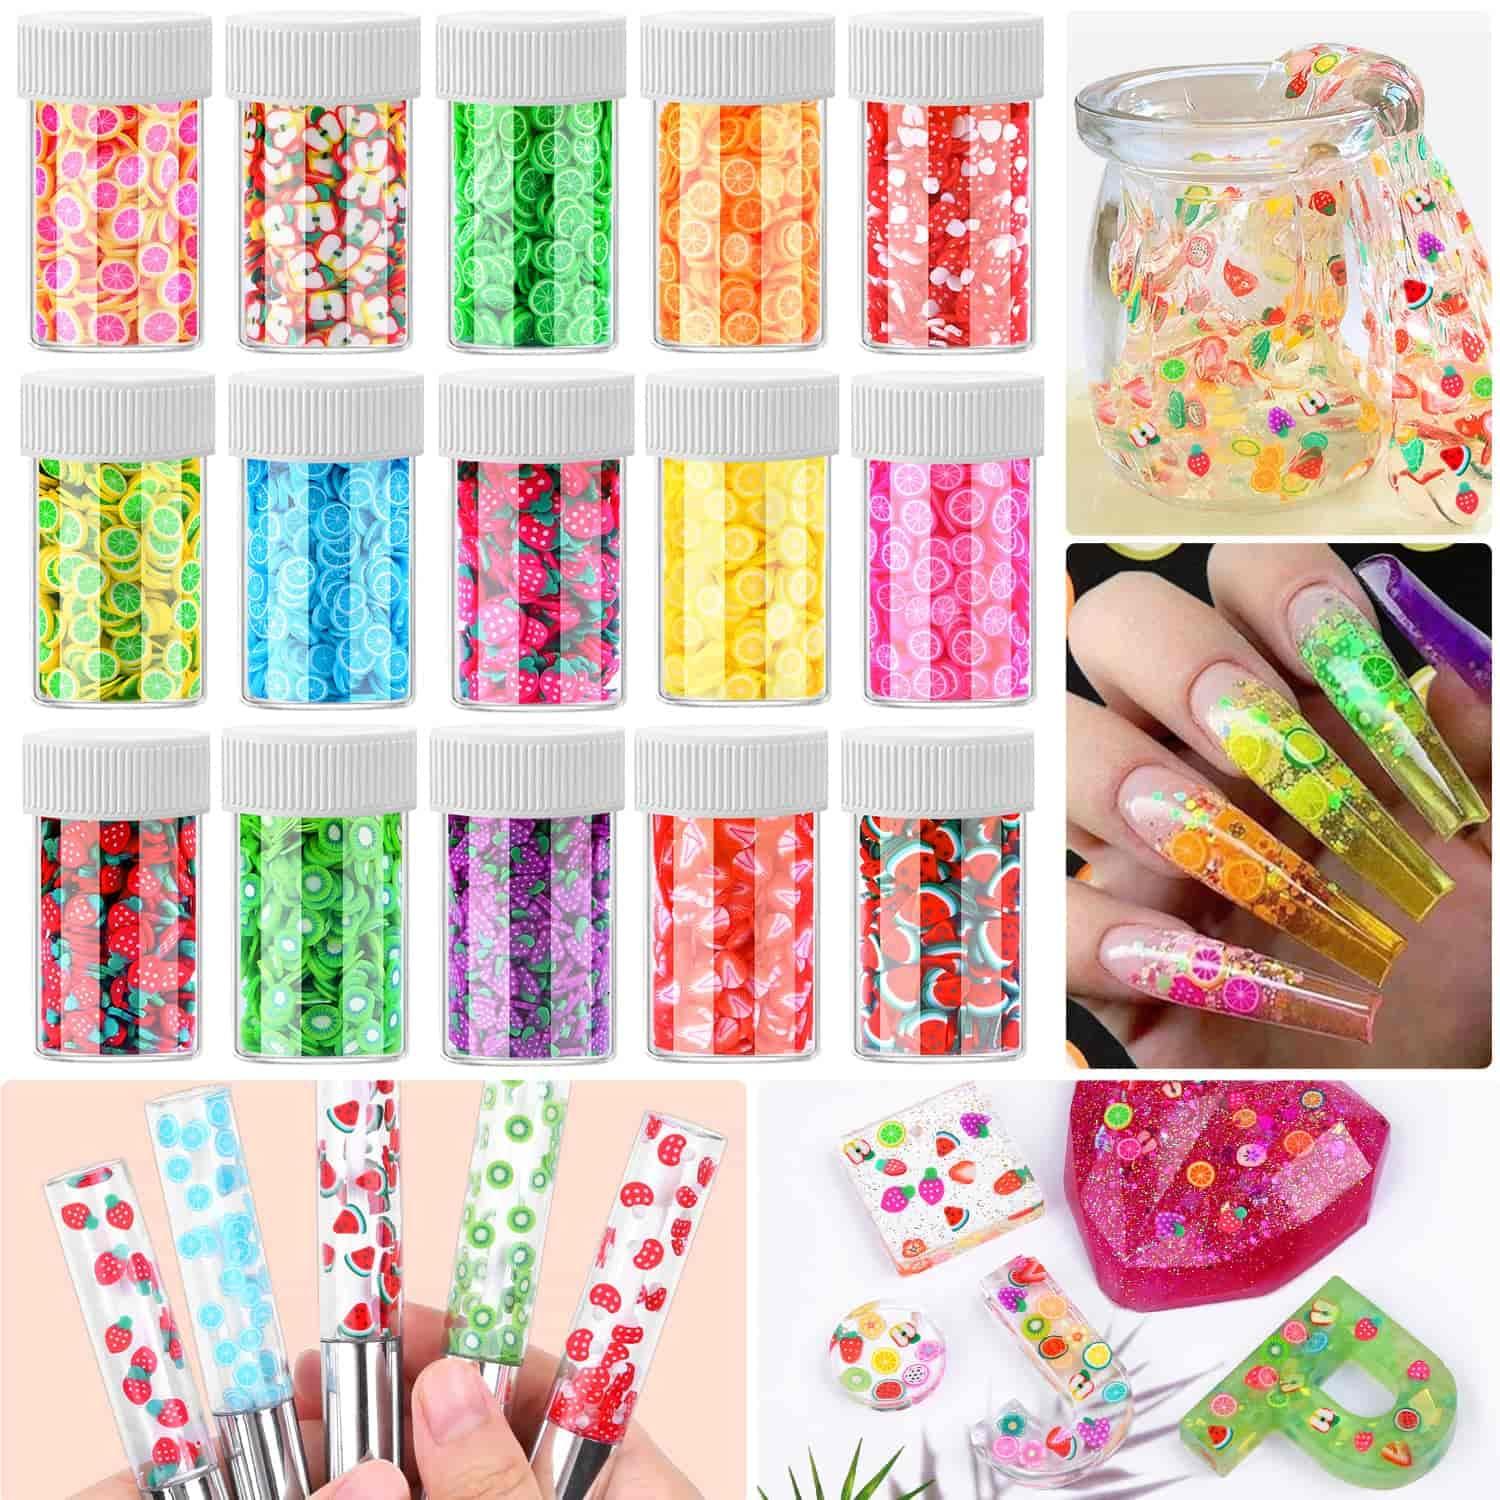 16000 pcs (20 Styles) Fruit Clay Slices Charms, VEINARDYL Nail Art Slices  3D Polymer Clay for DIY Crafts Resin Slime Making Cellphone Decoration